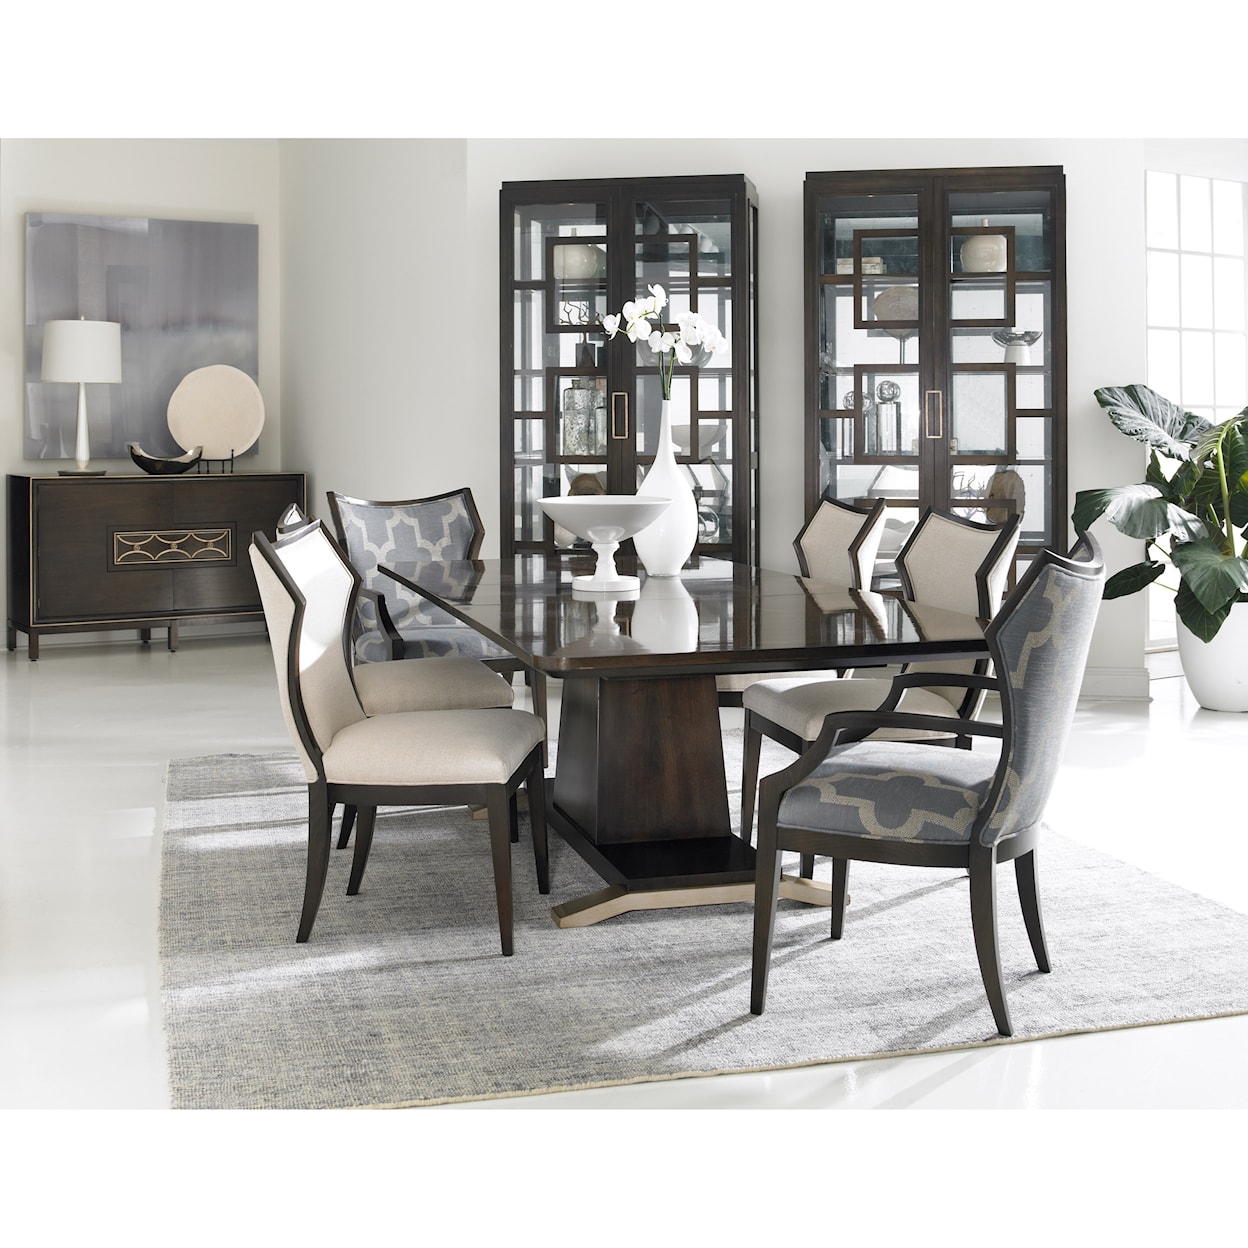 Hickory White Westport Collection Tyler Dining Table